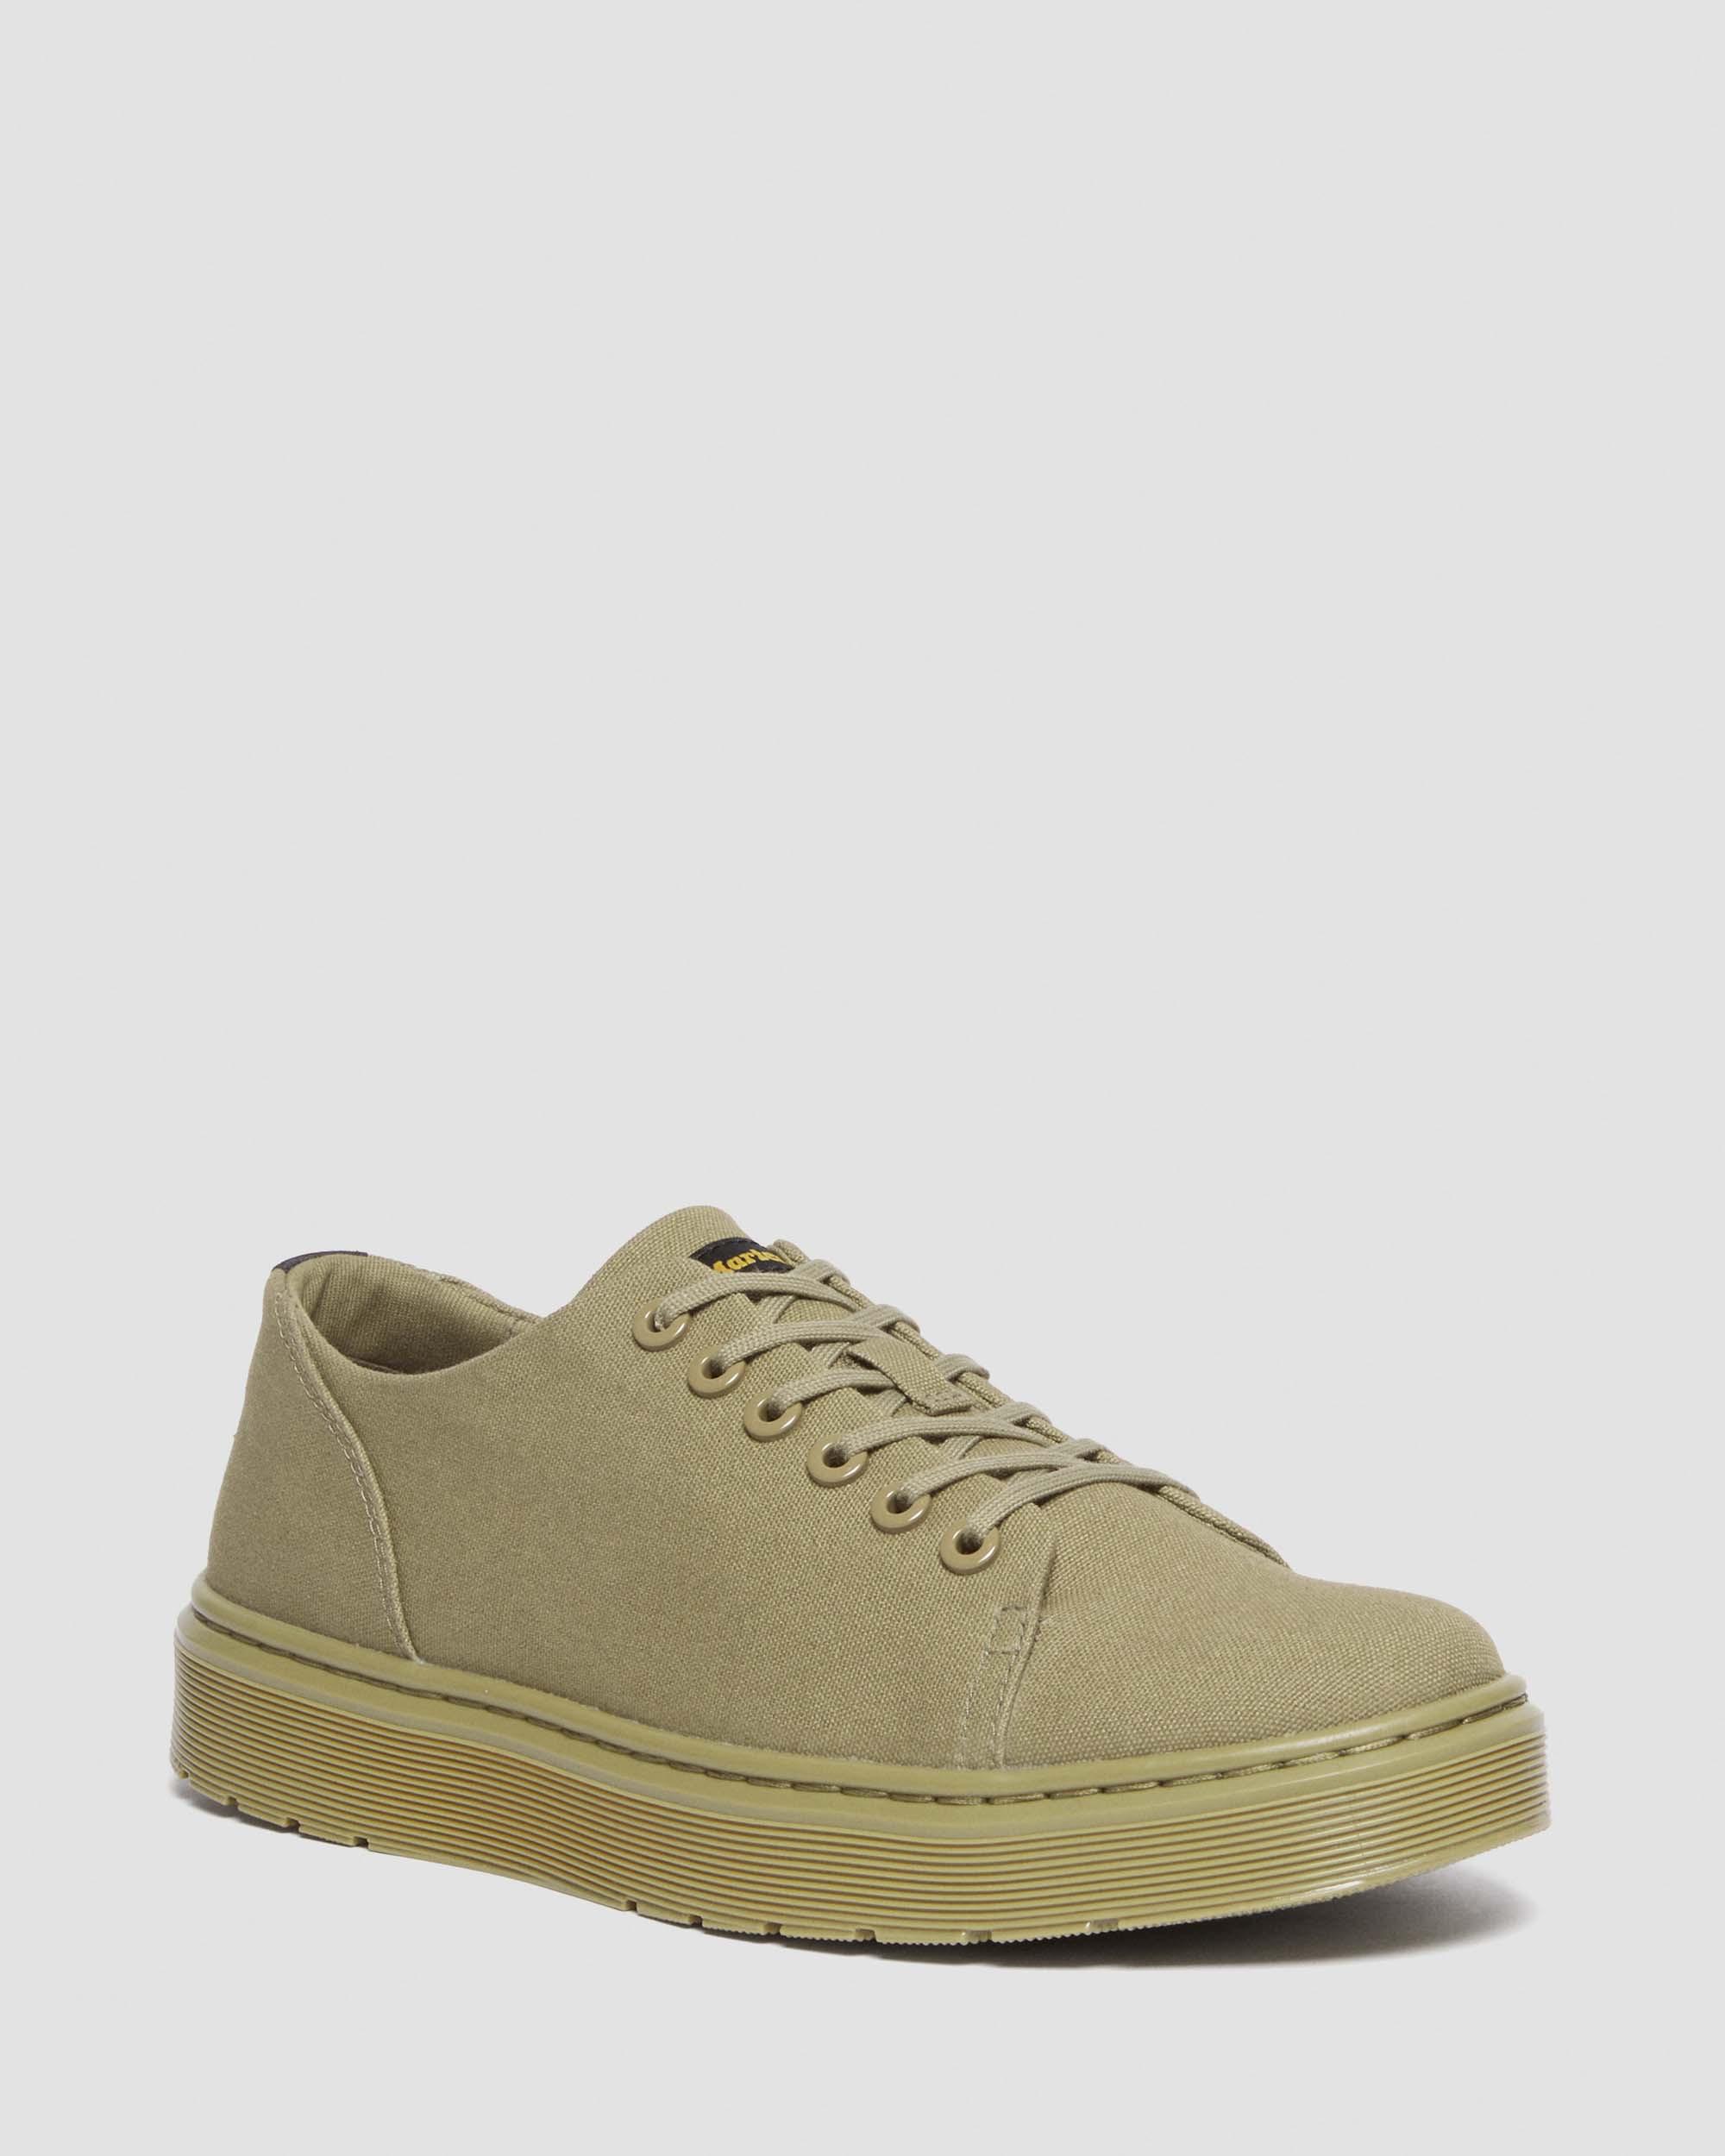 Dante Canvas Casual Shoes in Cool Grey